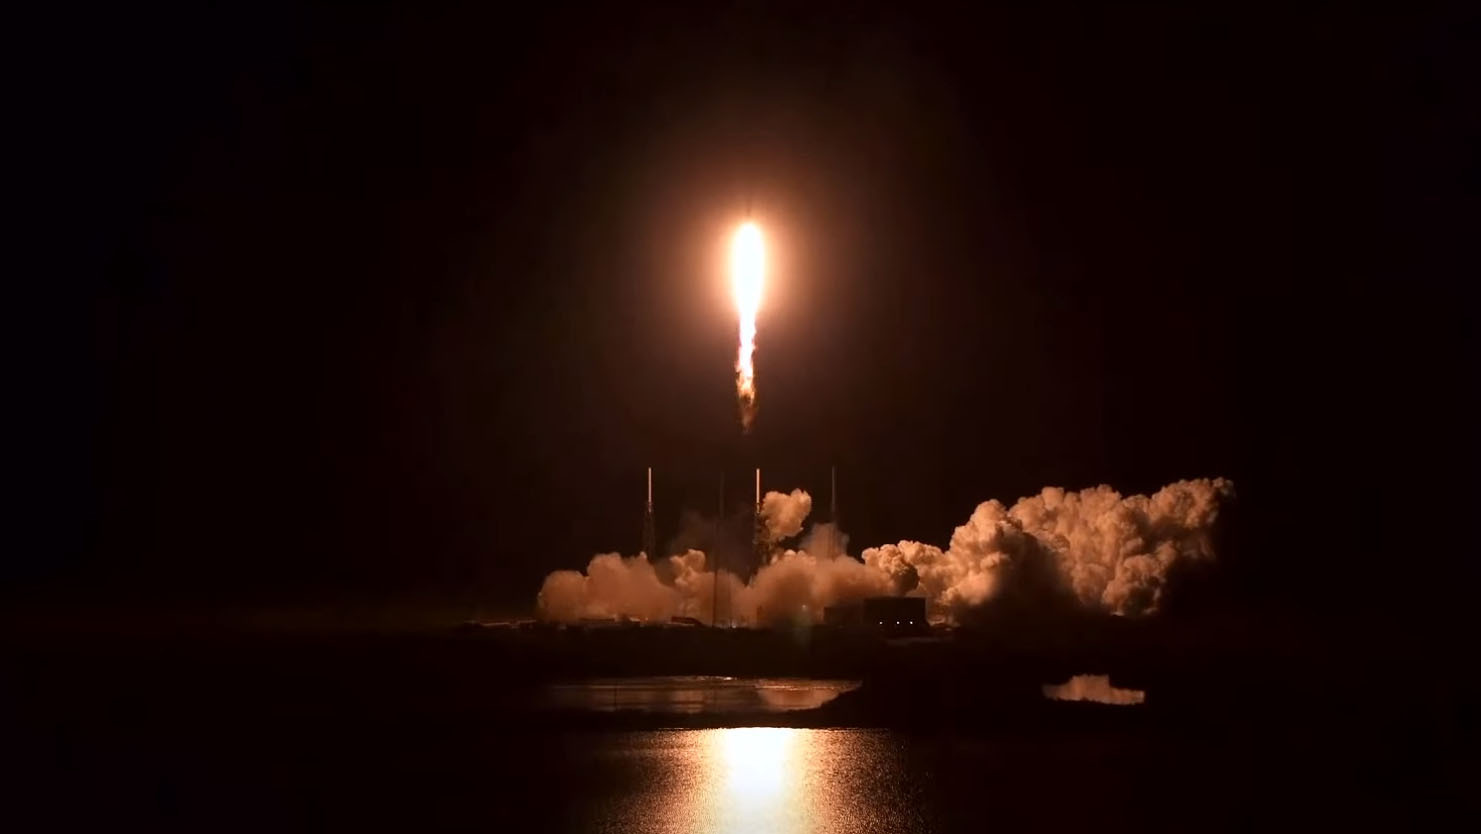 Tag SpaceX and Russia open a Valentine’s Day rocket doubleheader tonight